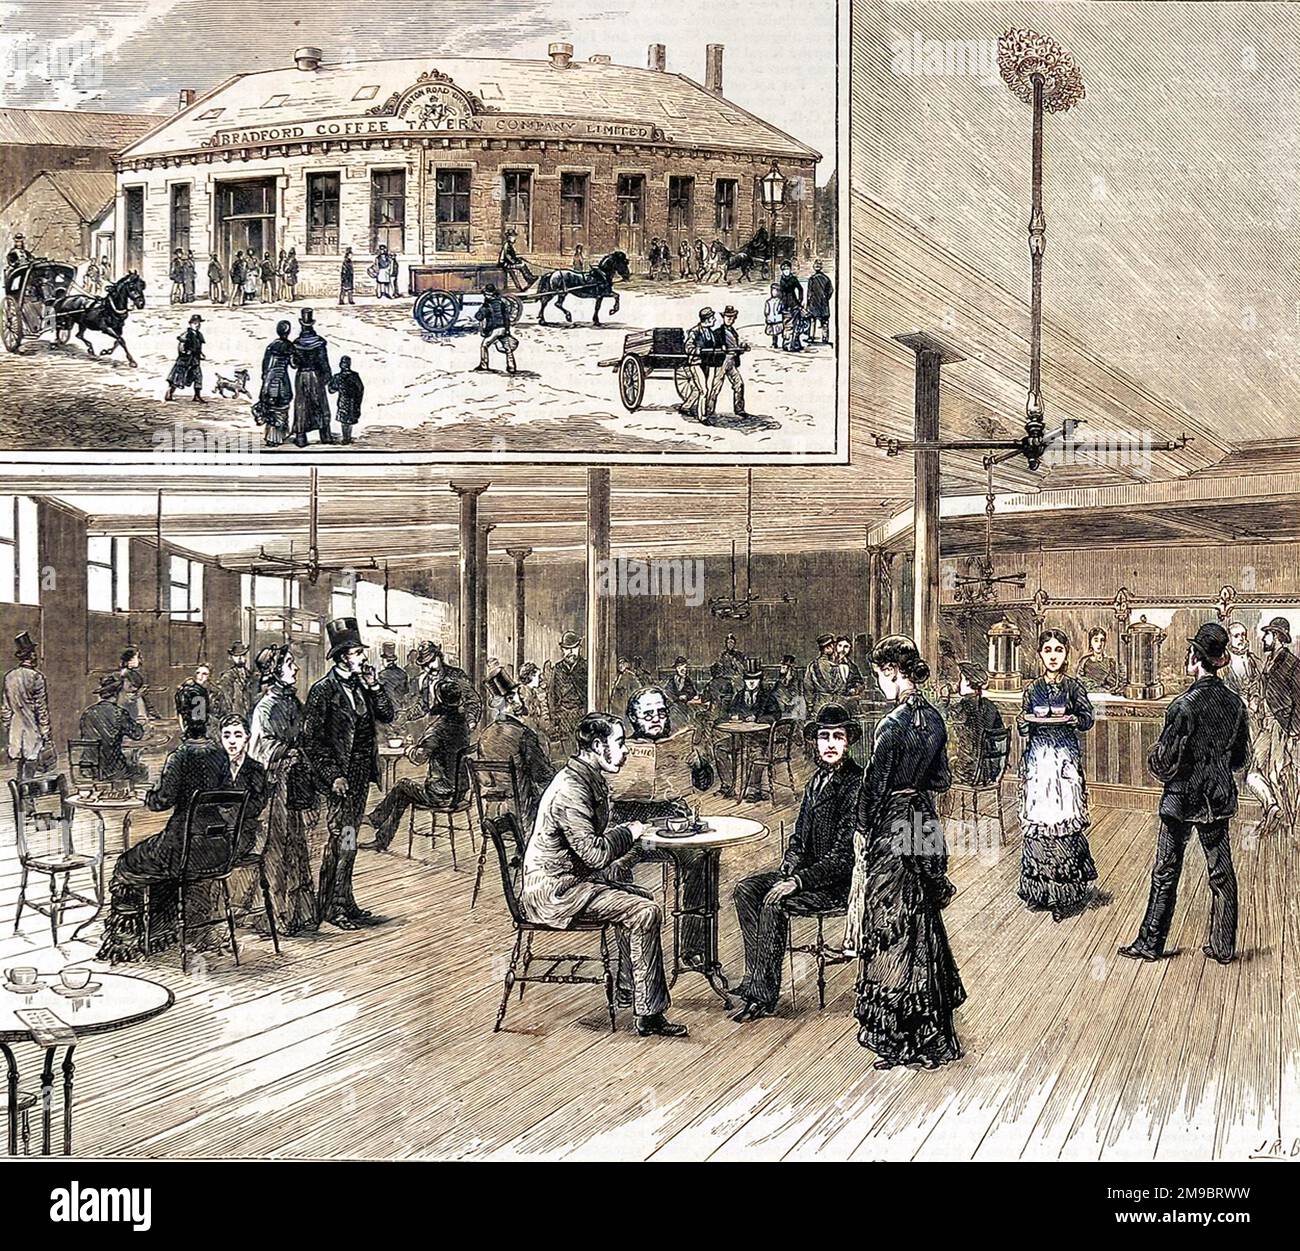 Interior and exterior views of the new coffee tavern in Bradford, inaugurated by W. E Forster, M.P in 1879. The Coffee Tavern movement was a Victorian effort to get people out of pubs. Proposed by the Bradford councillor, alderman and magistrate, Frederick Priestman, the tavern was opened at the junction of Westgate, Ivegate and Kirkgate and was an immediate commercial success serving food as well as coffee. Within a few years there were 28 branches in the Bradford district but with over 400 licensed beer sellers in the area, how much of a sobering effect they had on the local population is Stock Photo